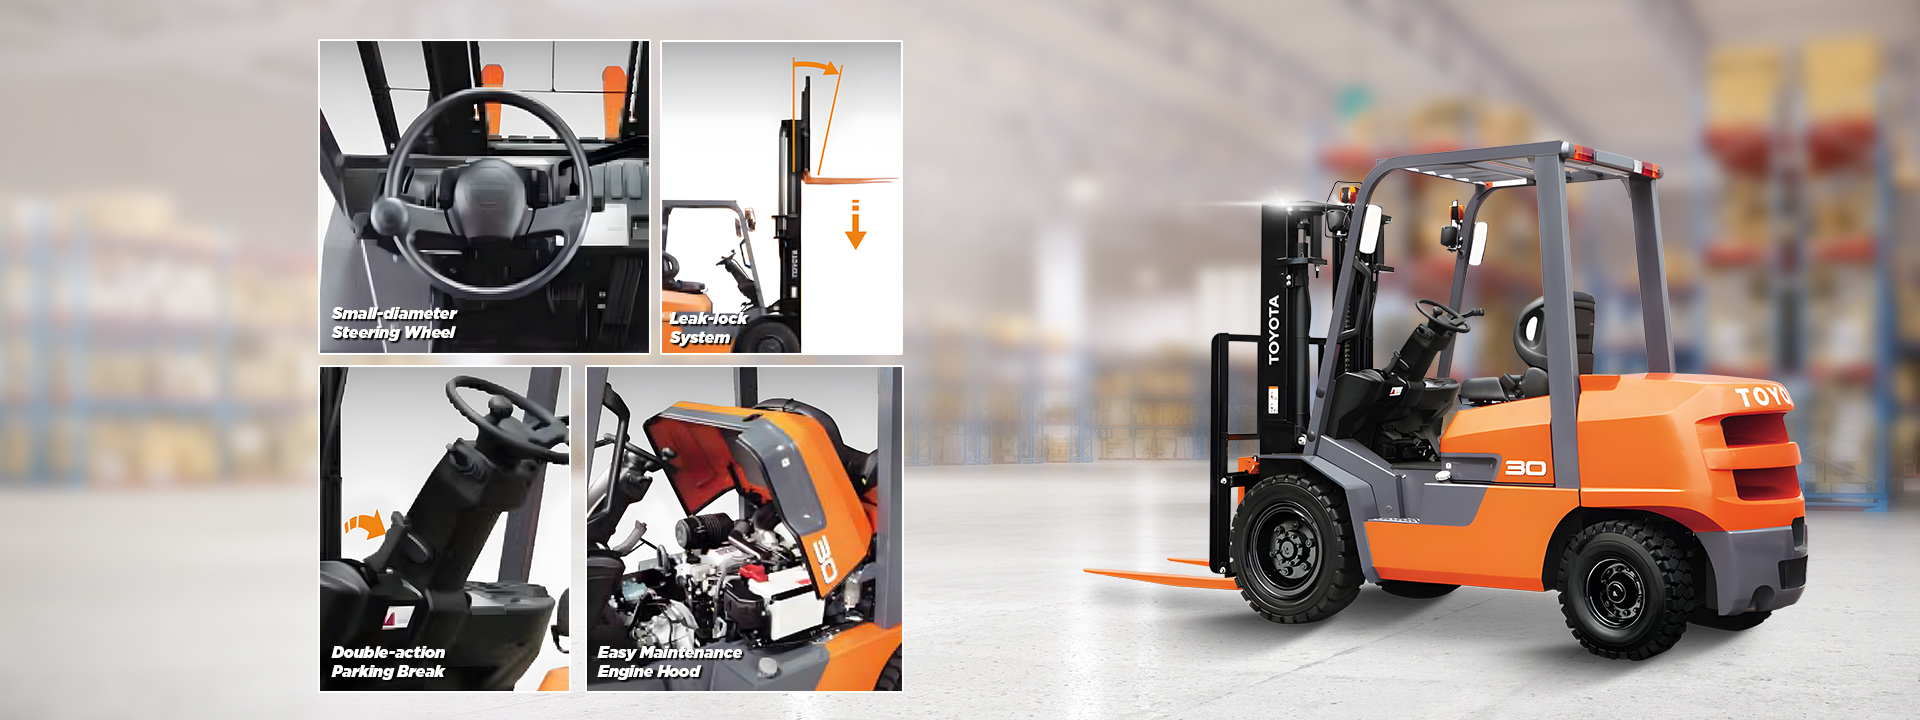 Specifications of toyota forklift fdzn series